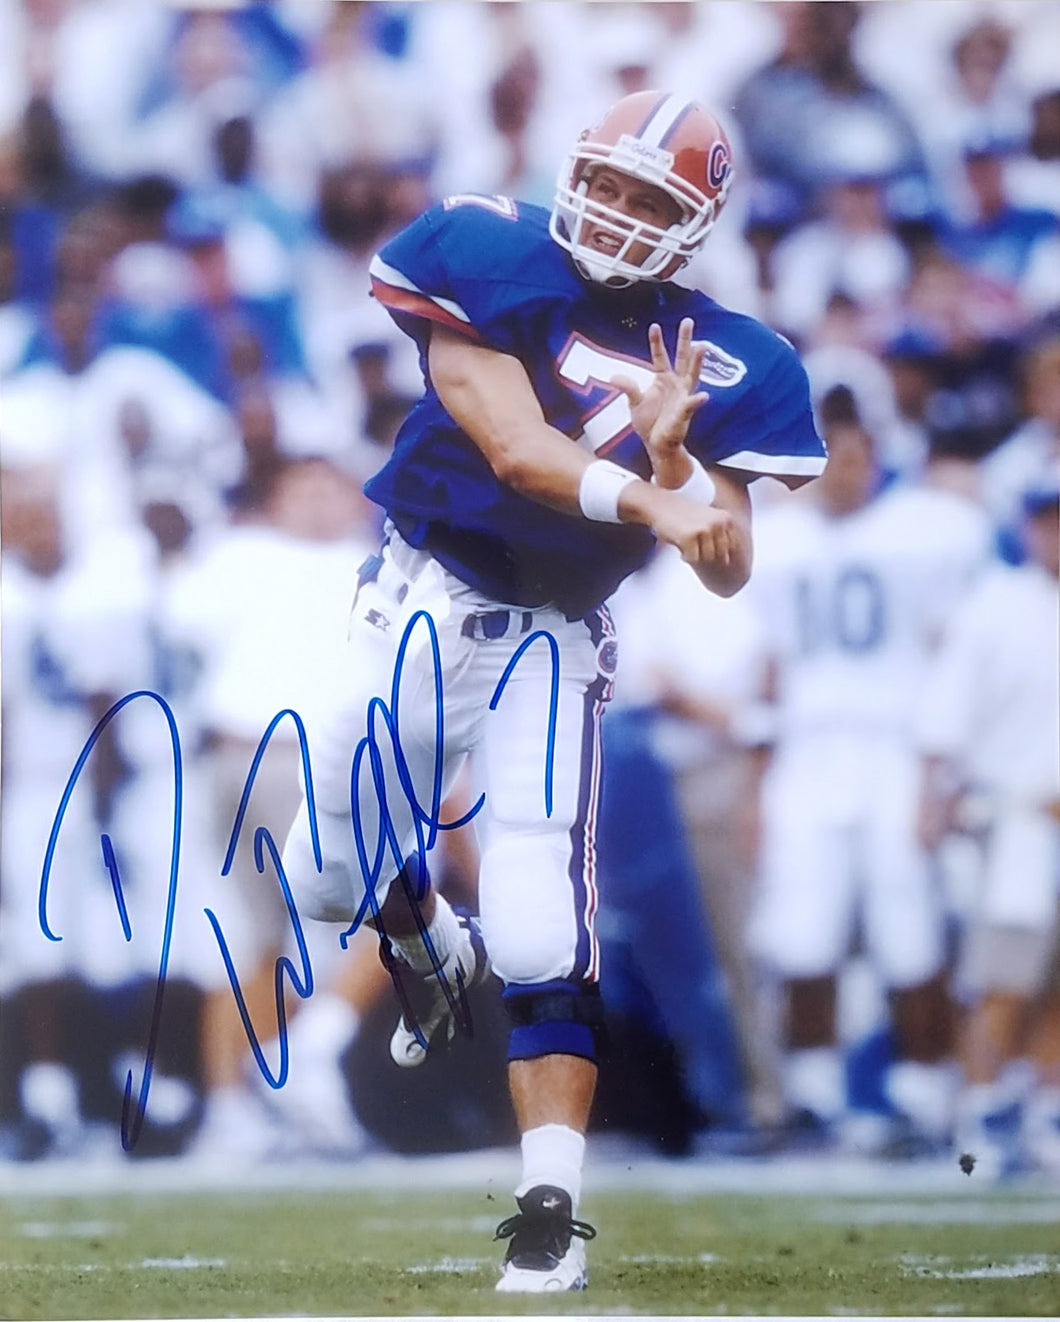 Danny Wuerffel  Signed Autographed 8x10